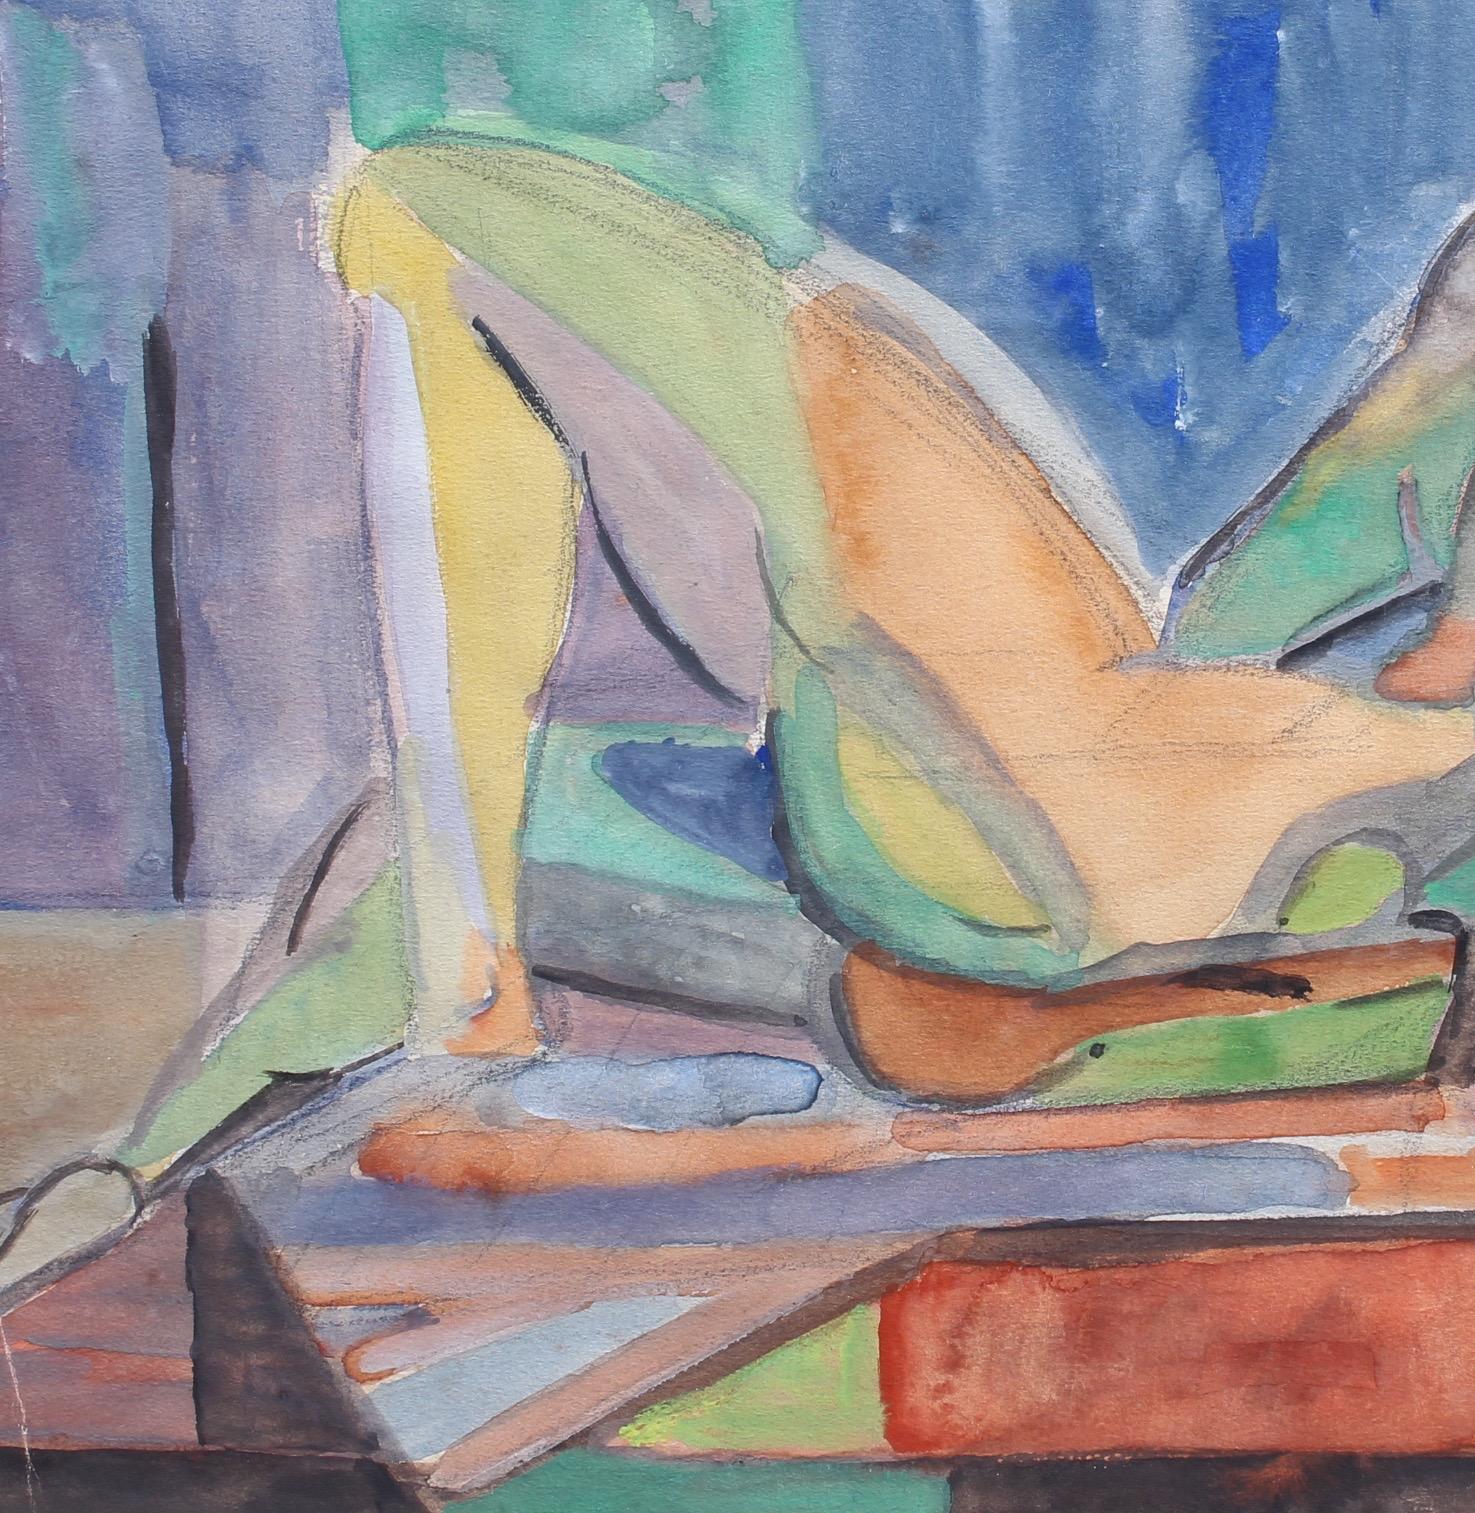 A cubist nude portrait of a reclining woman in model pose, in gouache on fine art paper (1957), by artist Kosta Stojanovitch. This work is one in a series of four images. Here, a shapely model lies in repose for the artist. She seems perfectly at